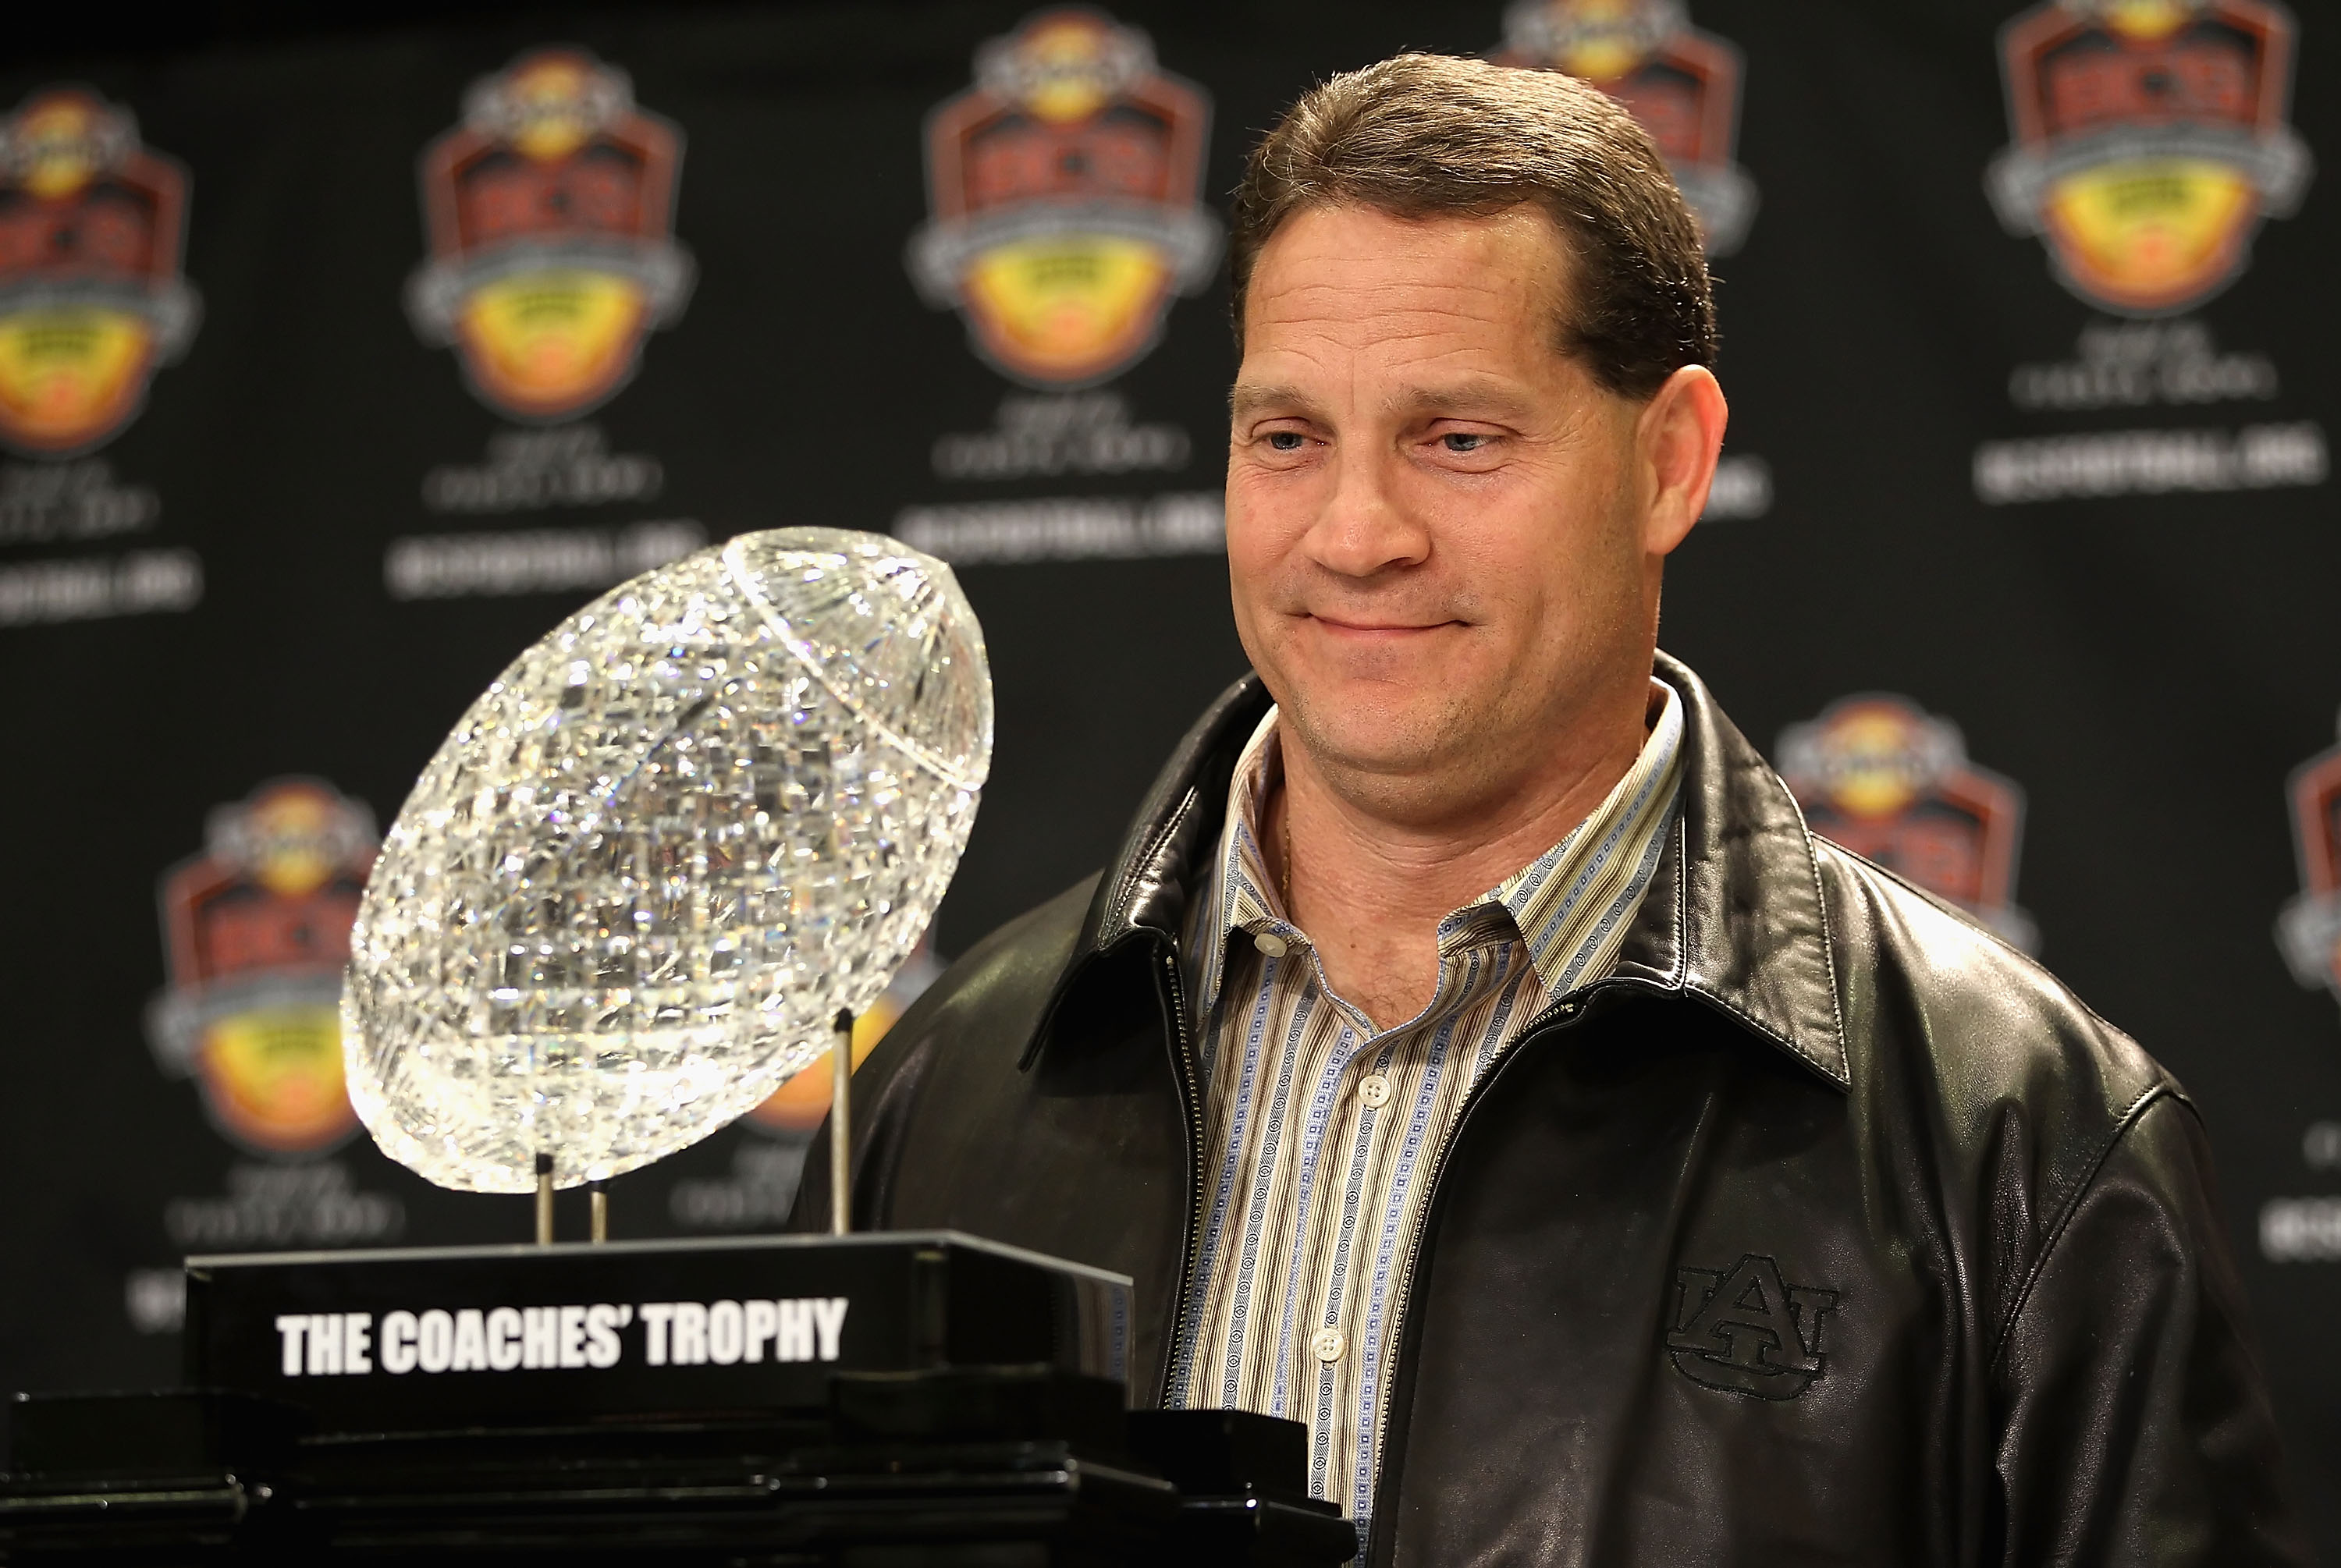 SCOTTSDALE, AZ - JANUARY 11:  Head coach Gene Chizik of the Auburn Tigers poses with the Coaches trophys during a press conference for the Tostitos BCS National Championship Game at the JW Marriott Camelback Inn on January 11, 2011 in Scottsdale, Arizona.